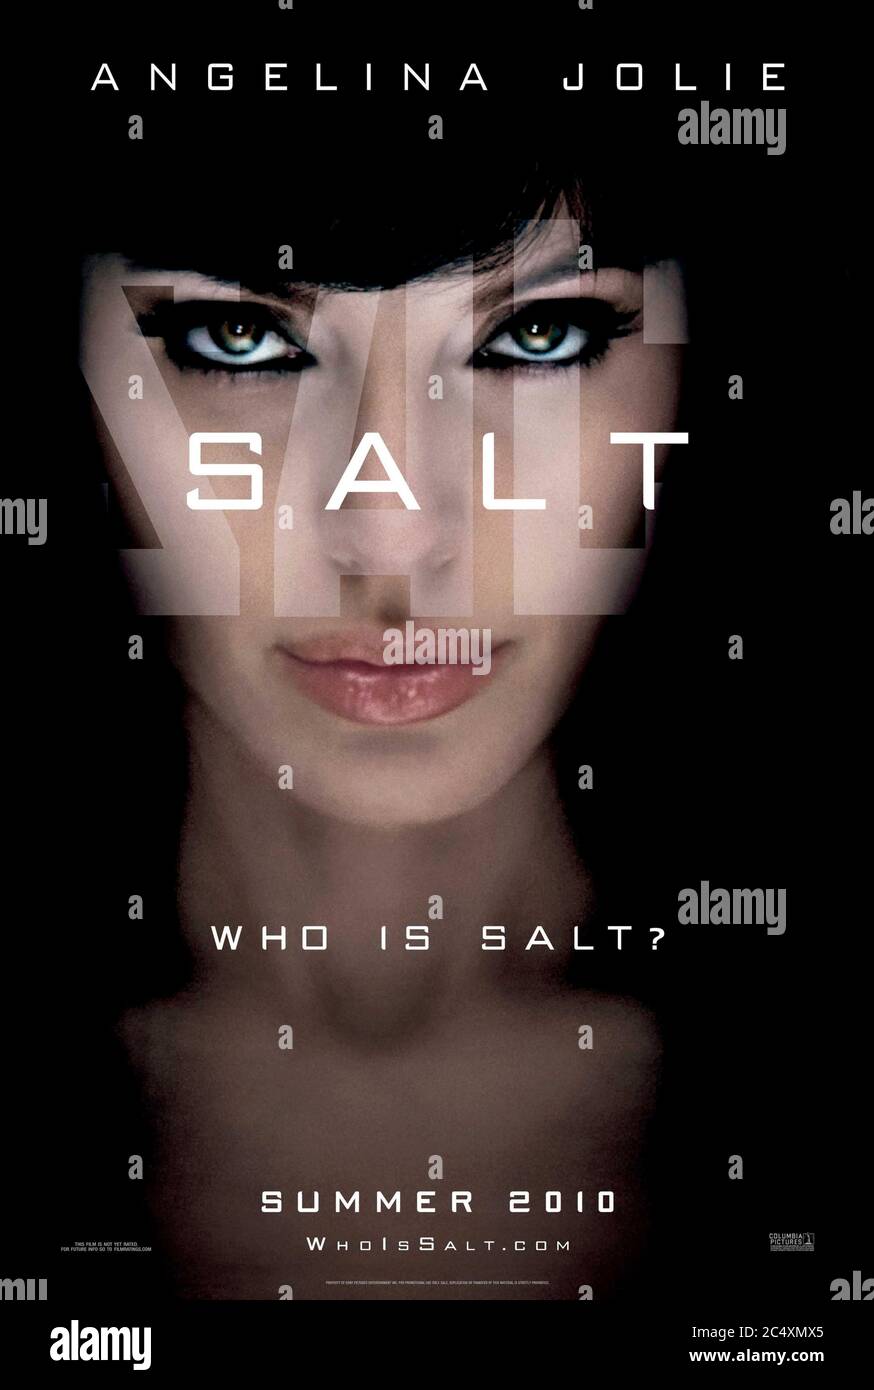 Salt (2010) directed by Phillip Noyce and starring Angelina Jolie, Liev Schreiber, Chiwetel Ejiofor and Daniel Olbrychski. Evelyn Salk a CIA agent is wrongly accused of being a Russian agent and goes on the run. Stock Photo